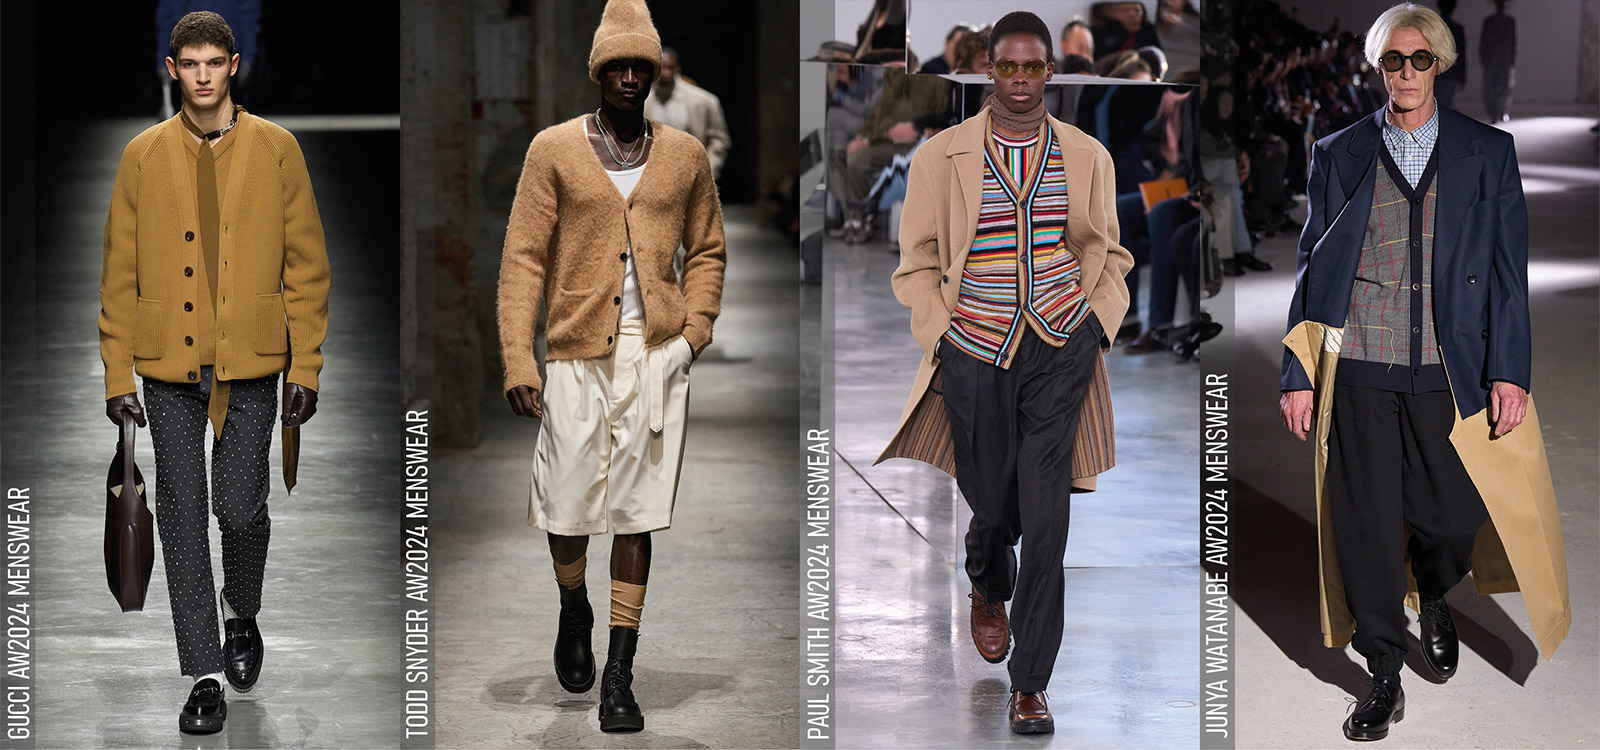 Grandpacore looks at Gucci, Todd Snyder, Paul Smith, Junya Watanabe